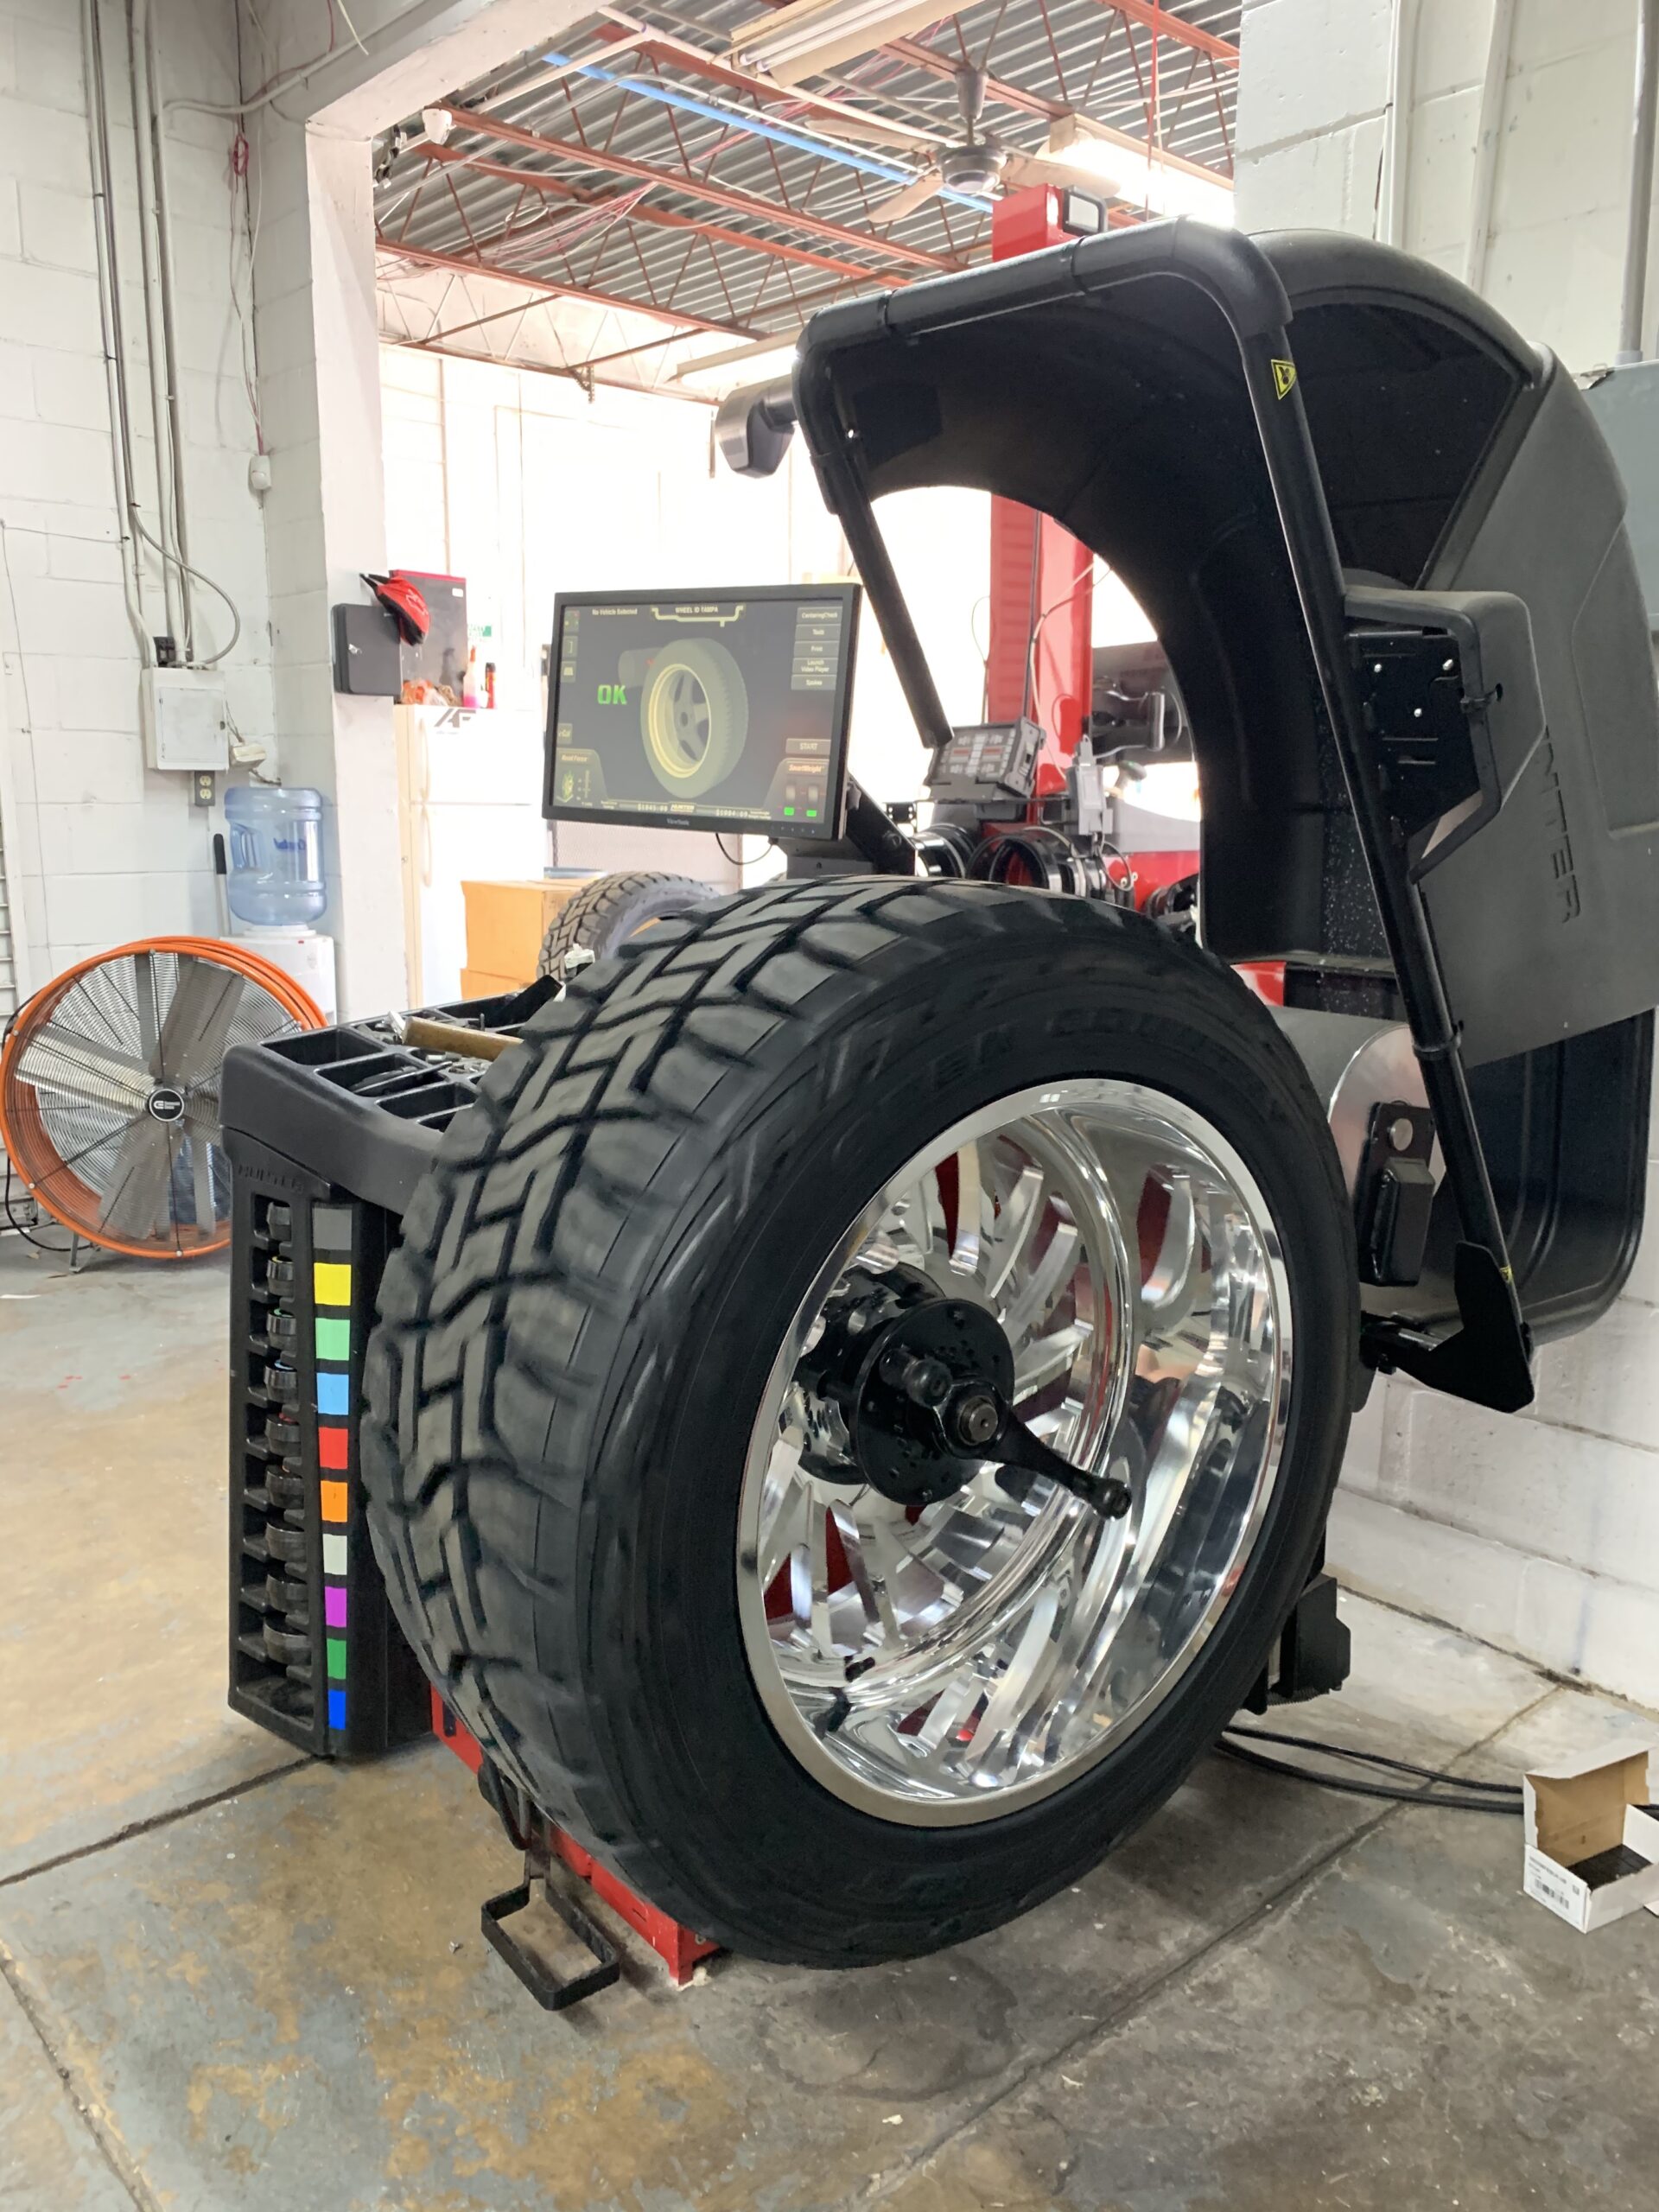 Wheel Identity balancing a tire on a machine for proper alignment and improved driving experience in Tampa, FL.